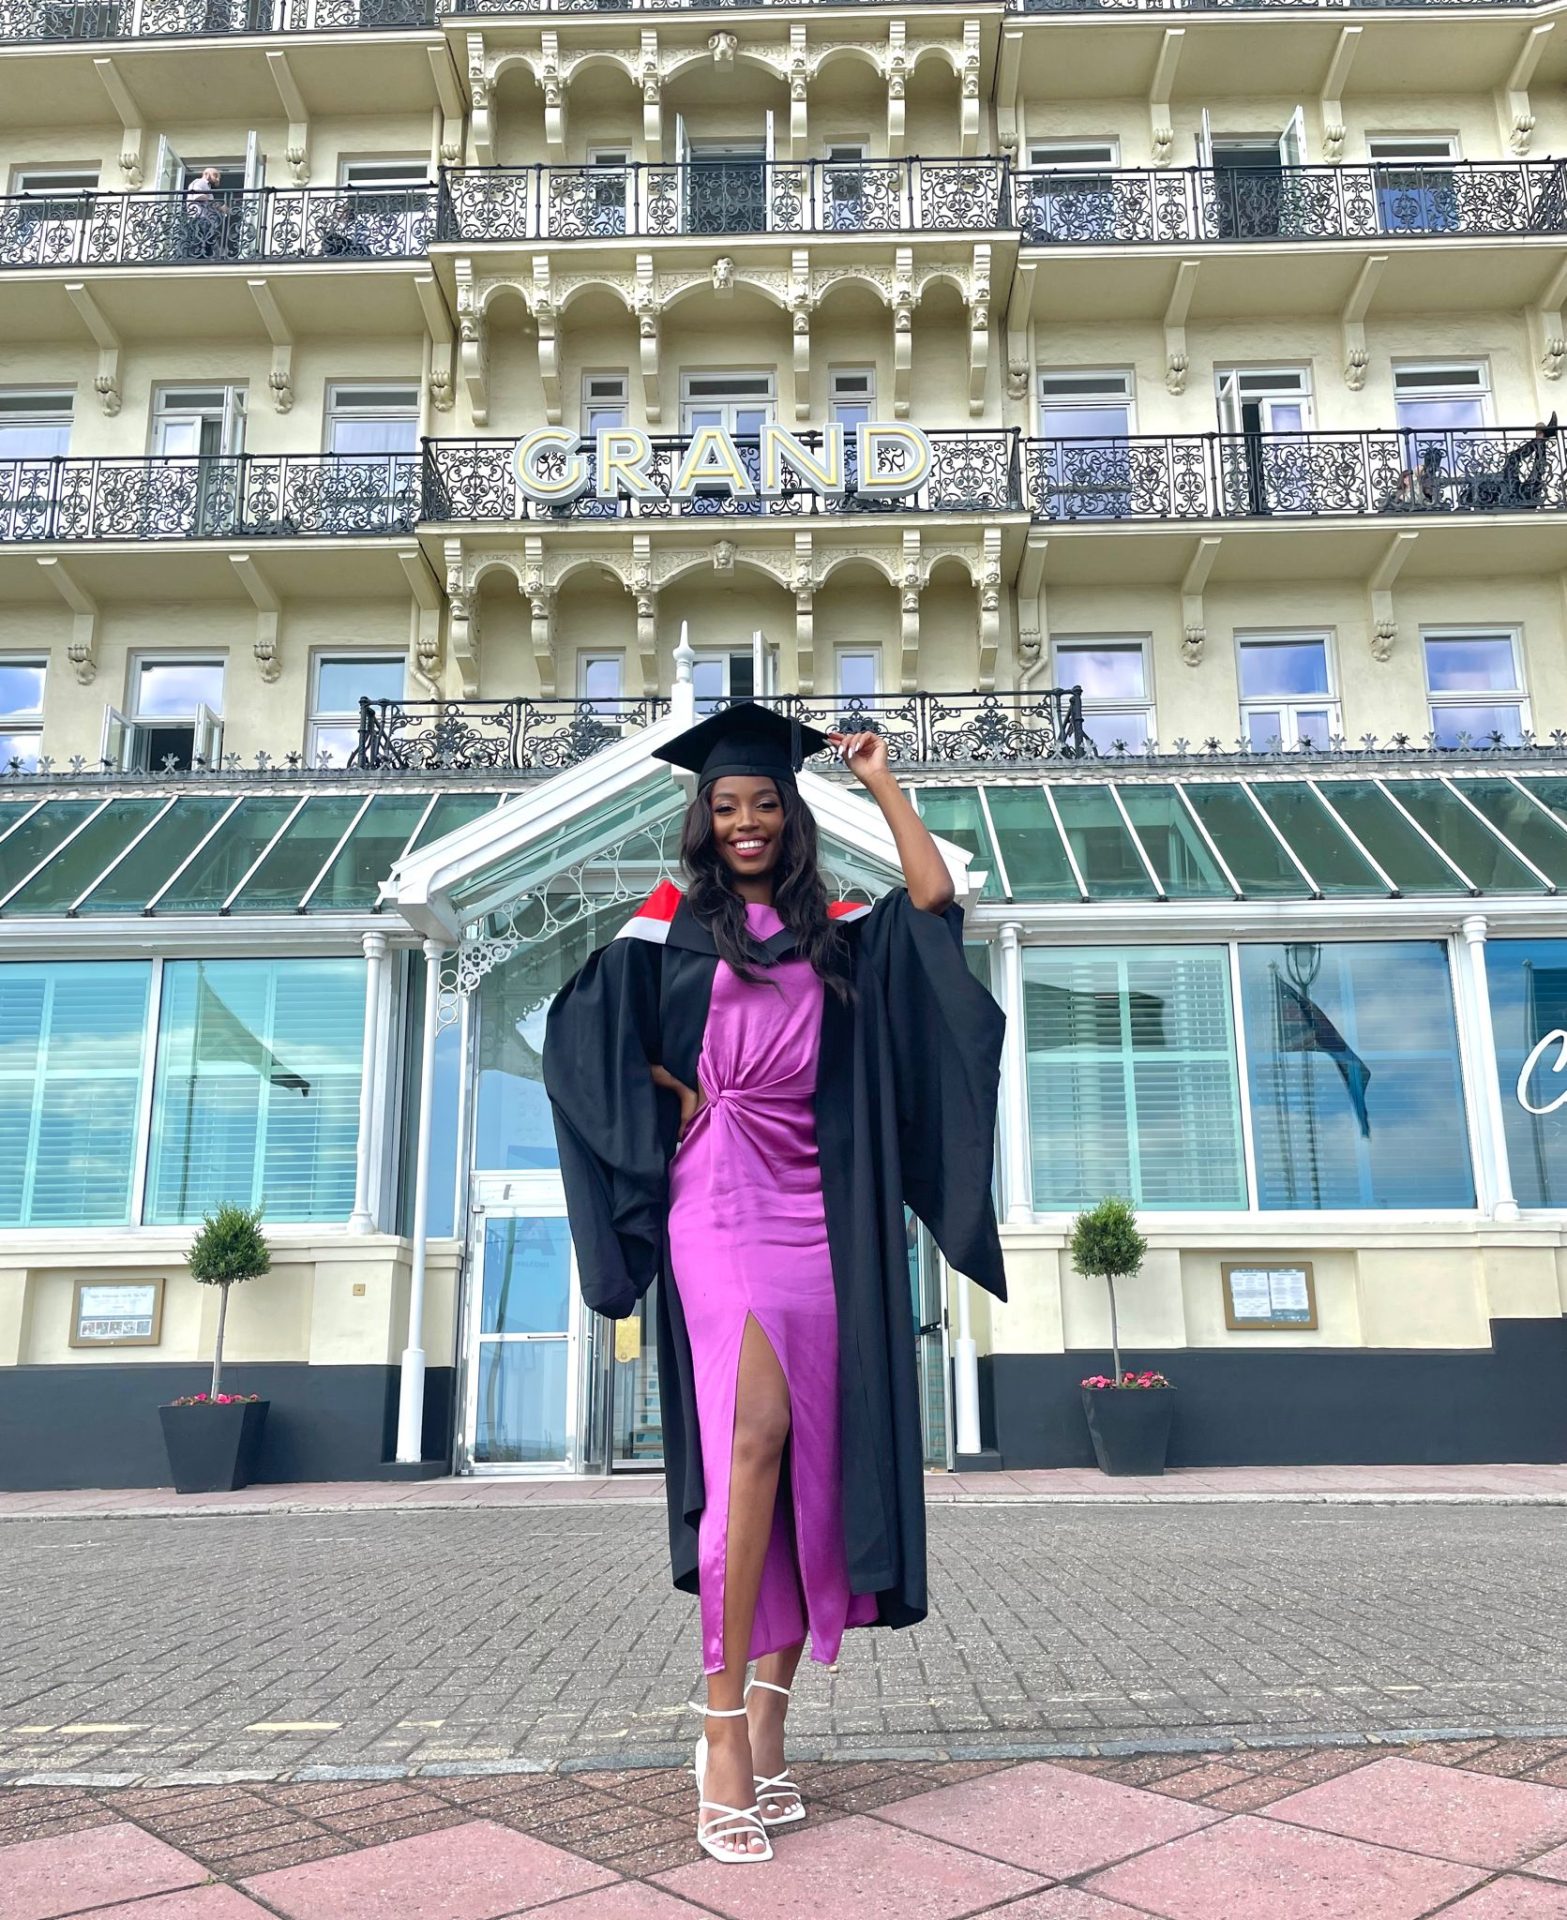 Miss England Celebrates her graduation in style TWO years after finishing her degree